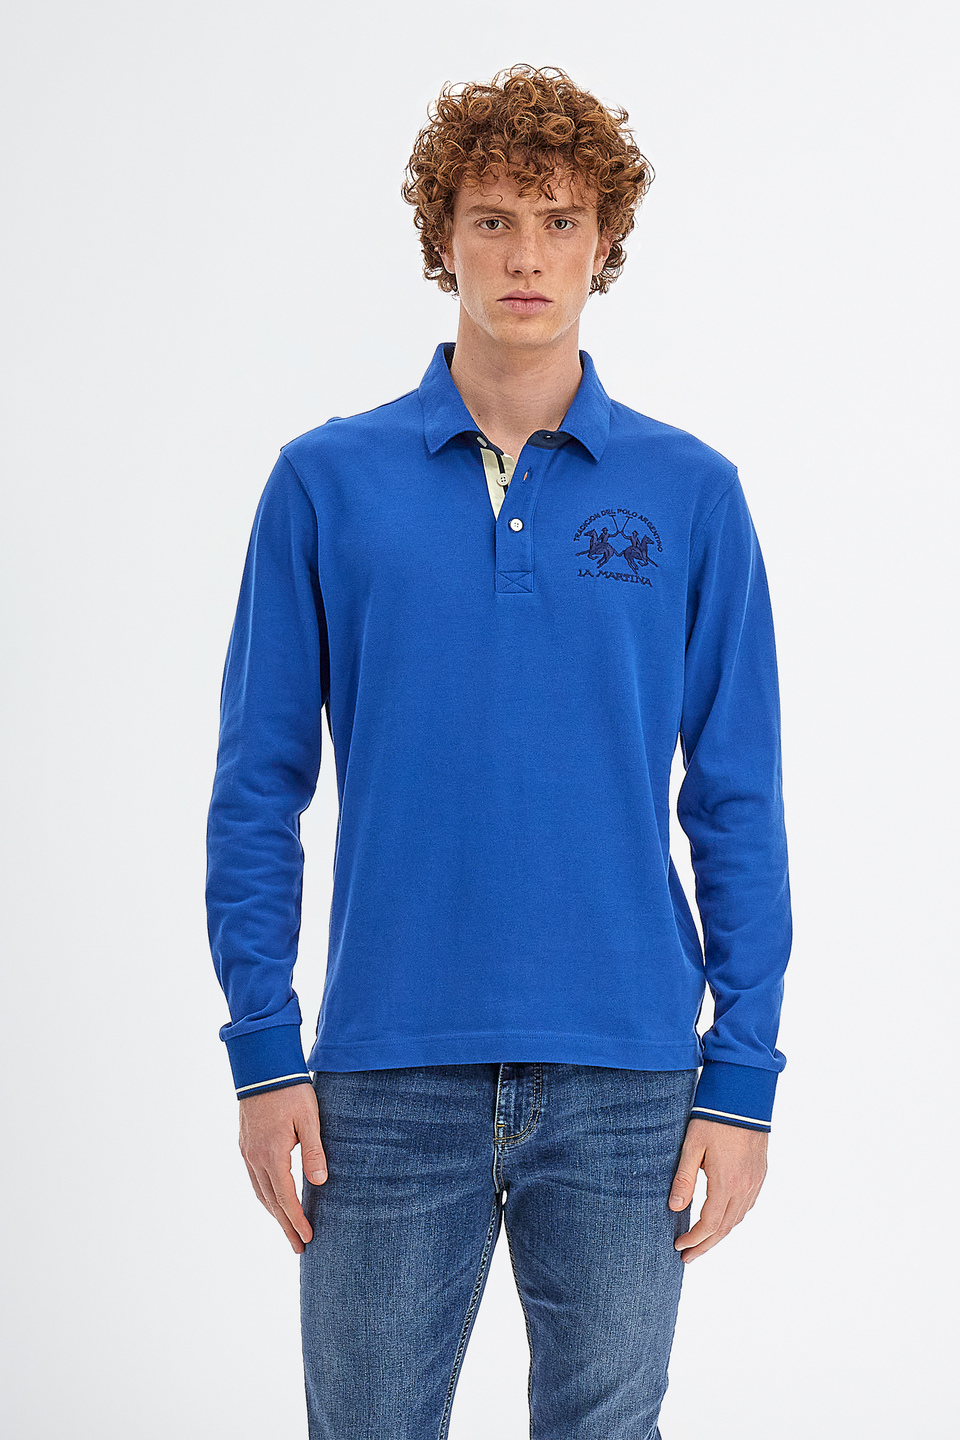 Men’s polo shirt in cotton jersey long sleeves slim fit | La Martina - Official Online Shop